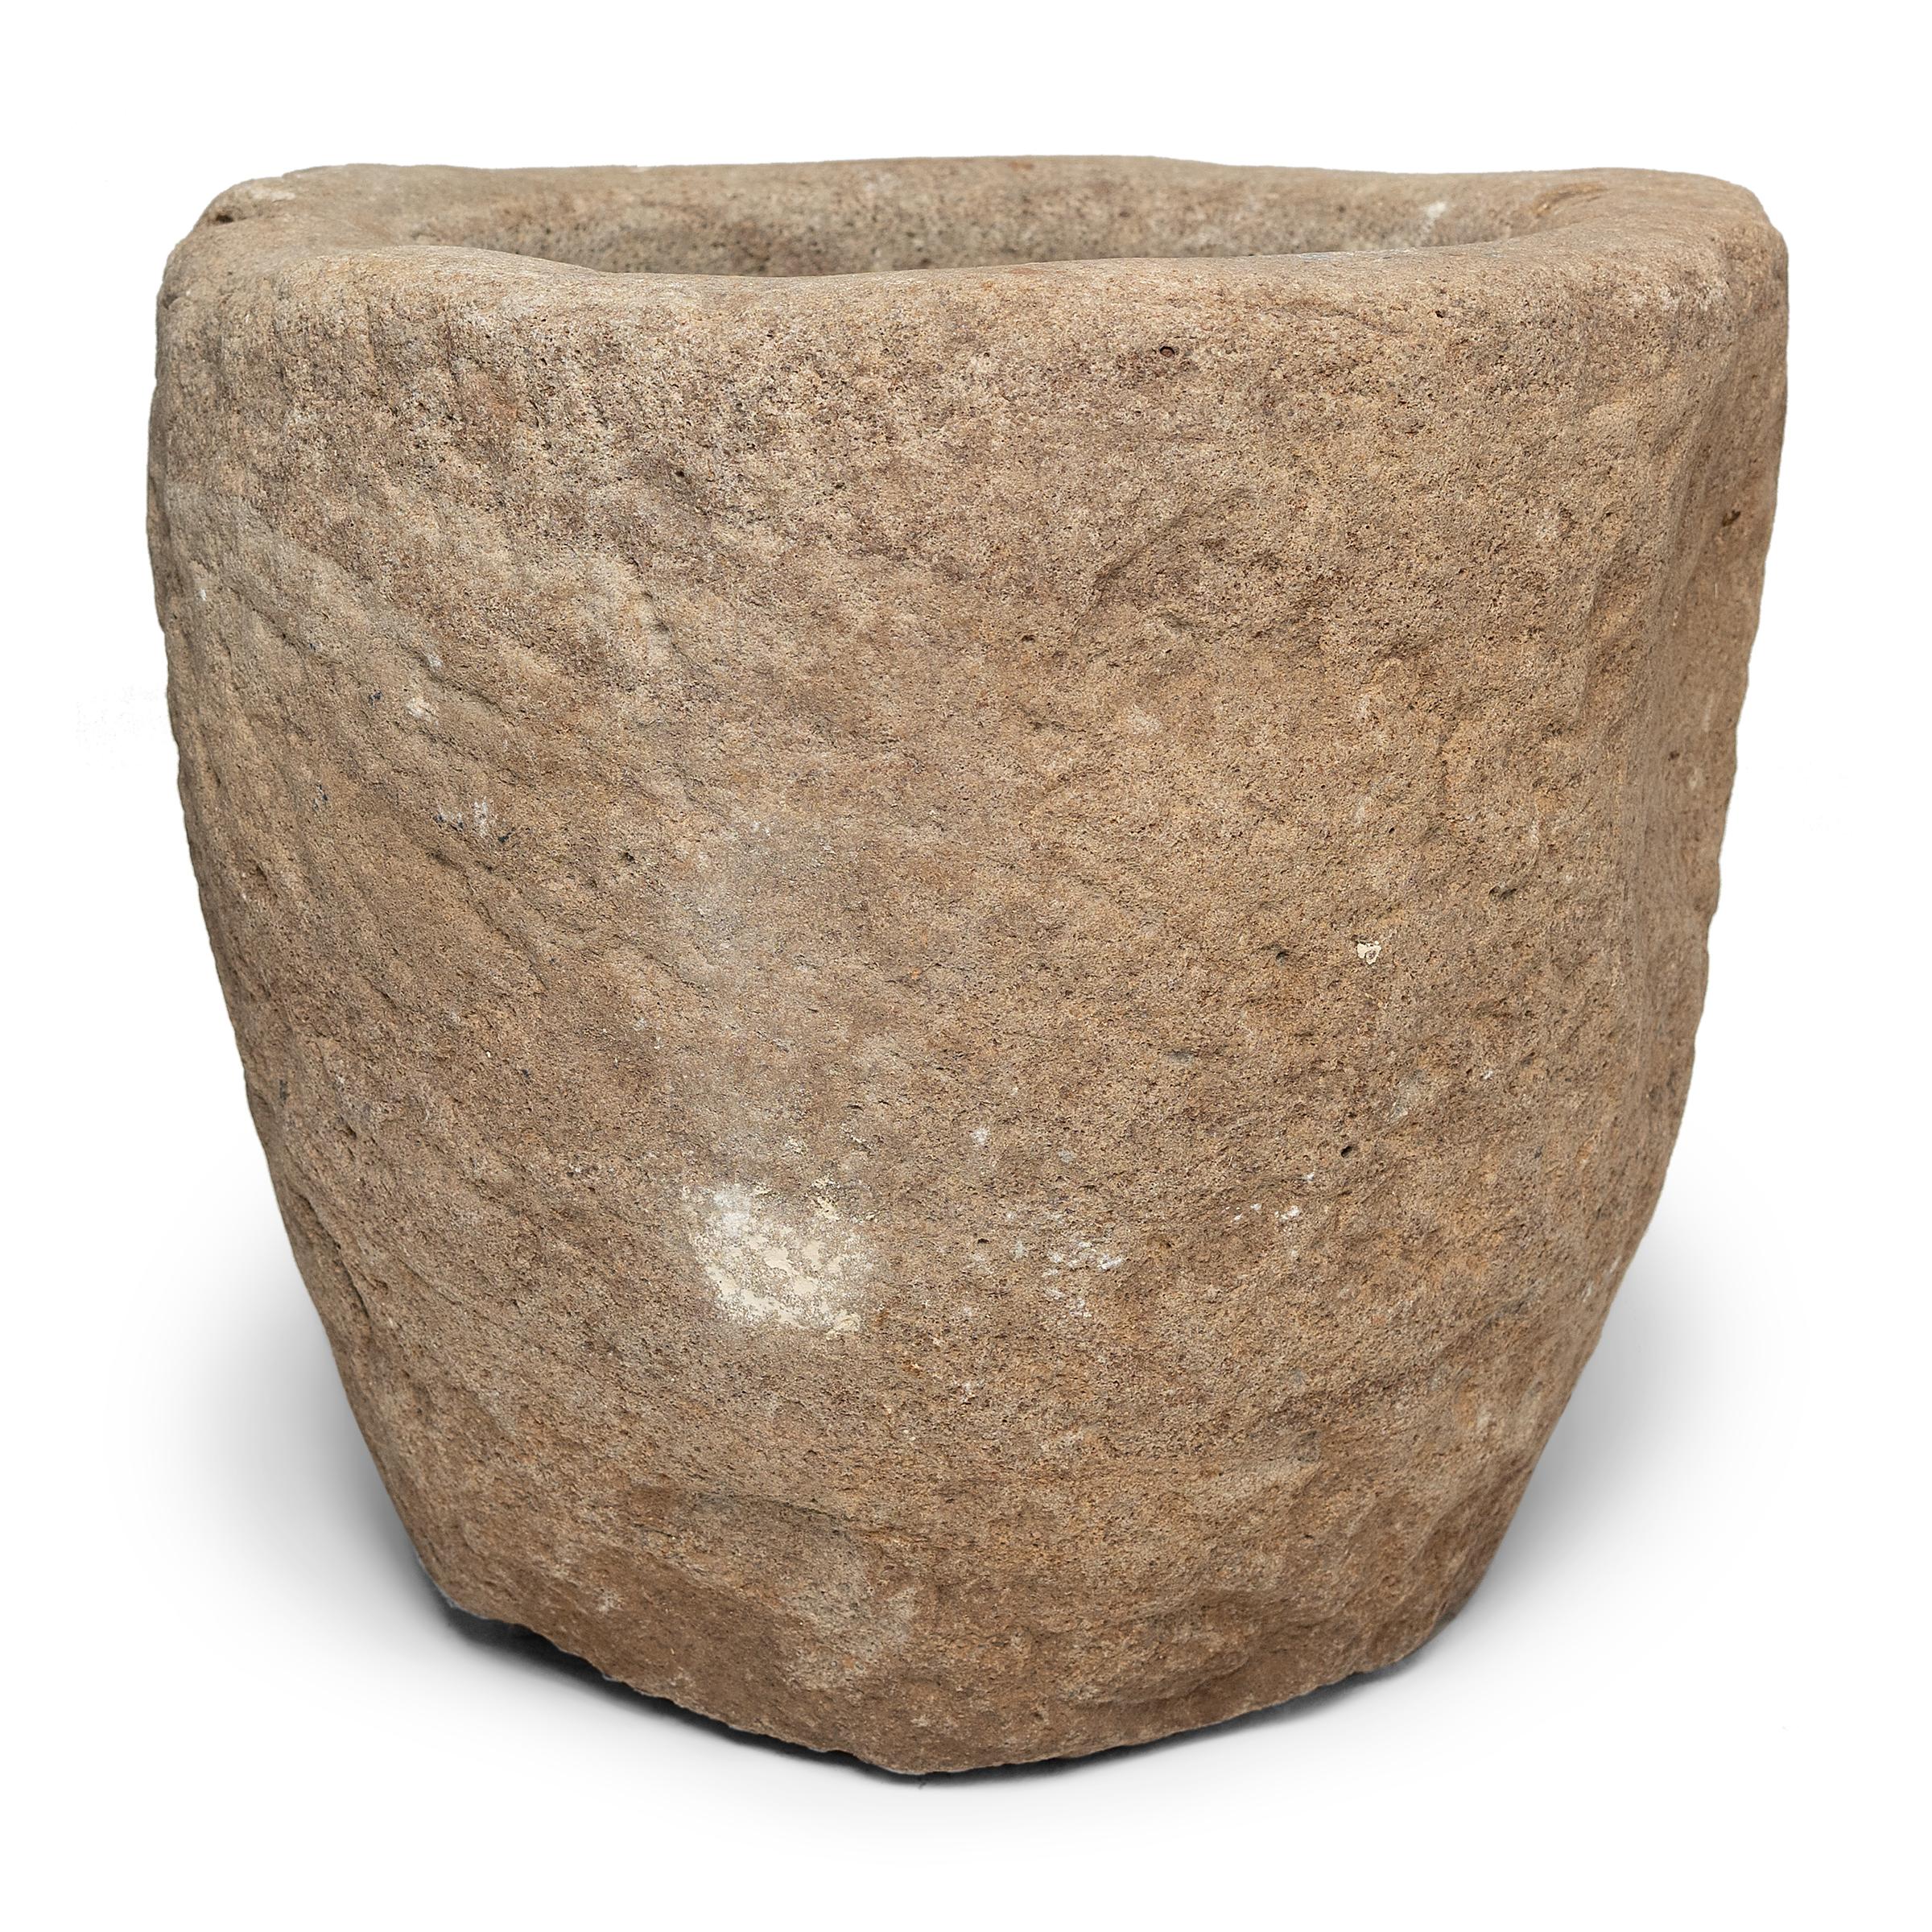 Hand carved from a single block of limestone, this early 20th century stone vessel was originally used as a mortar to grind rice and other raw materials. The large mortar has Minimalist appeal, its simple form showcasing the natural color and